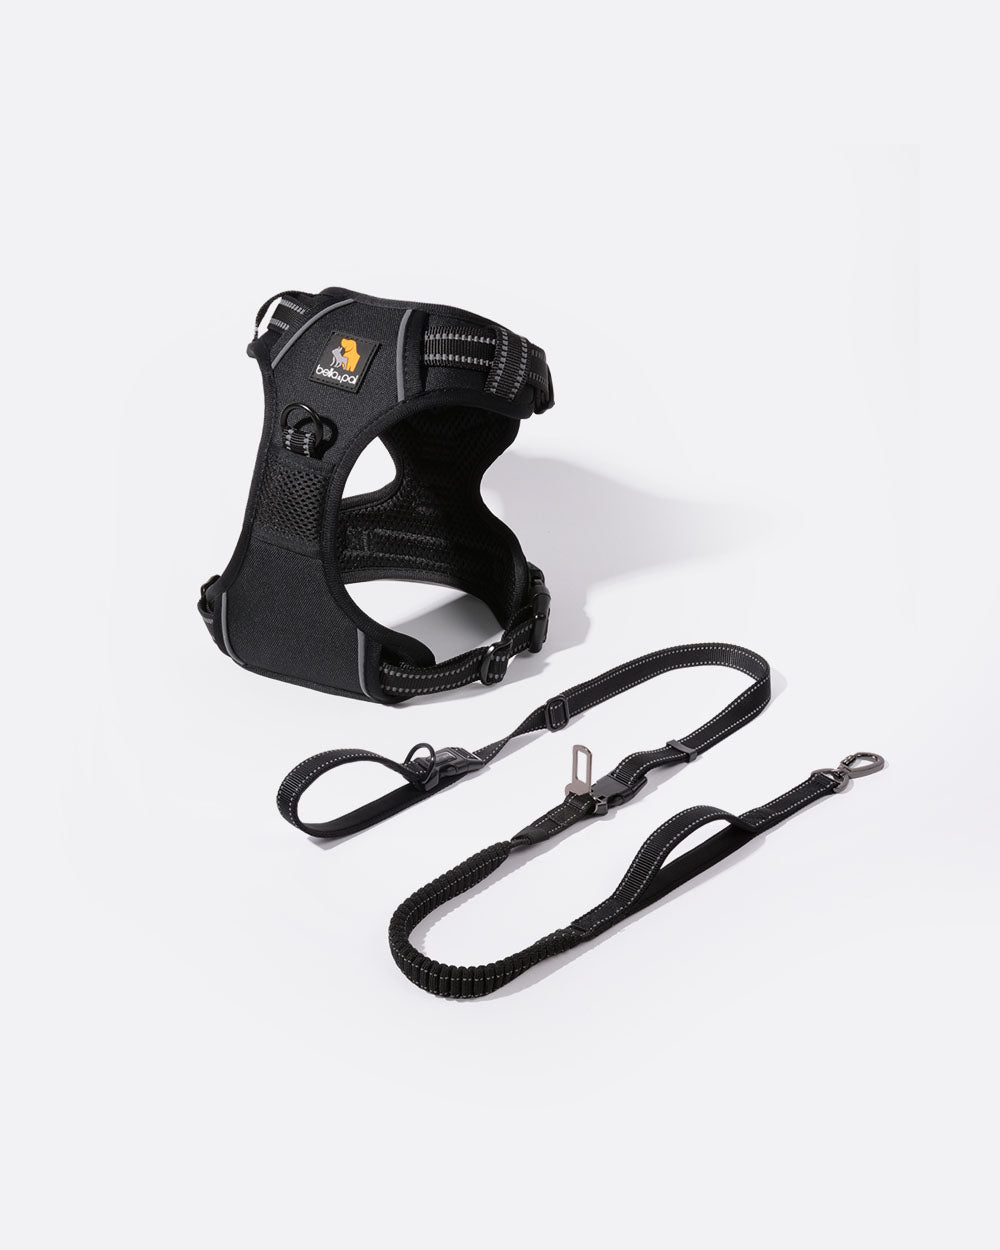 Smart Pro Harness and Hands-Free Leash Set - Classic Black